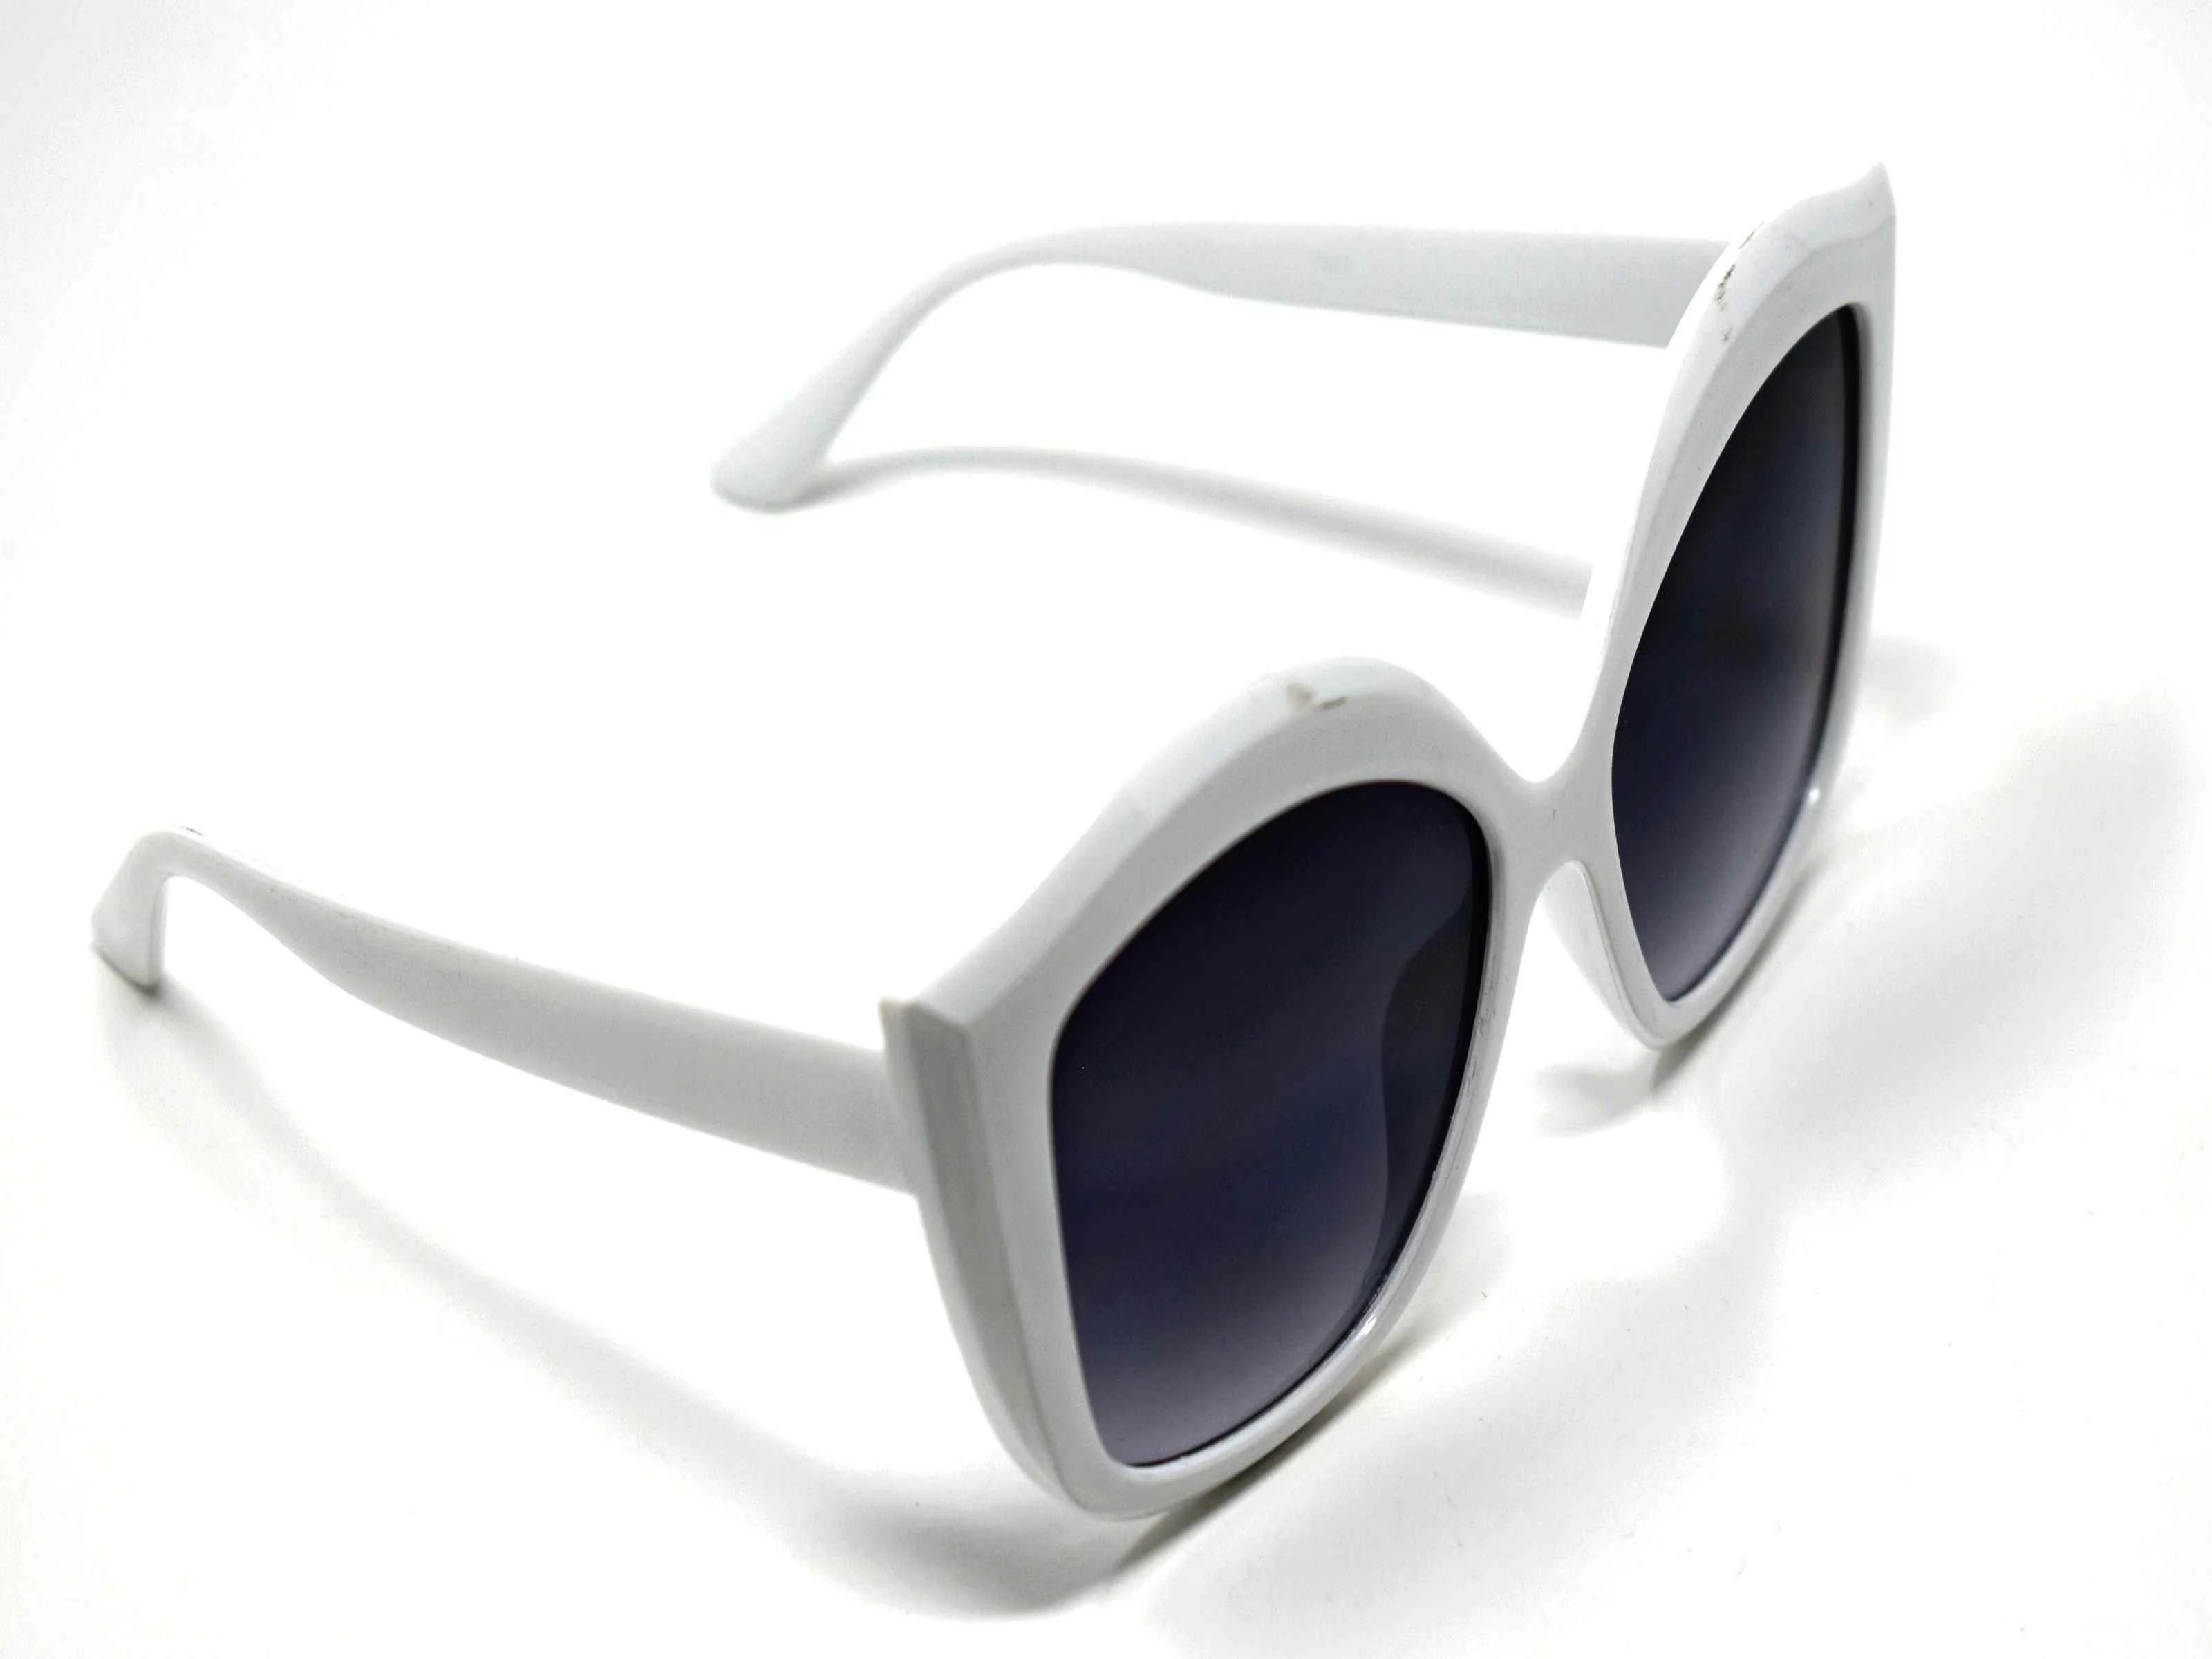 Retro glam has come again with our Petal white cat eye frame sunglasses with a black lens.